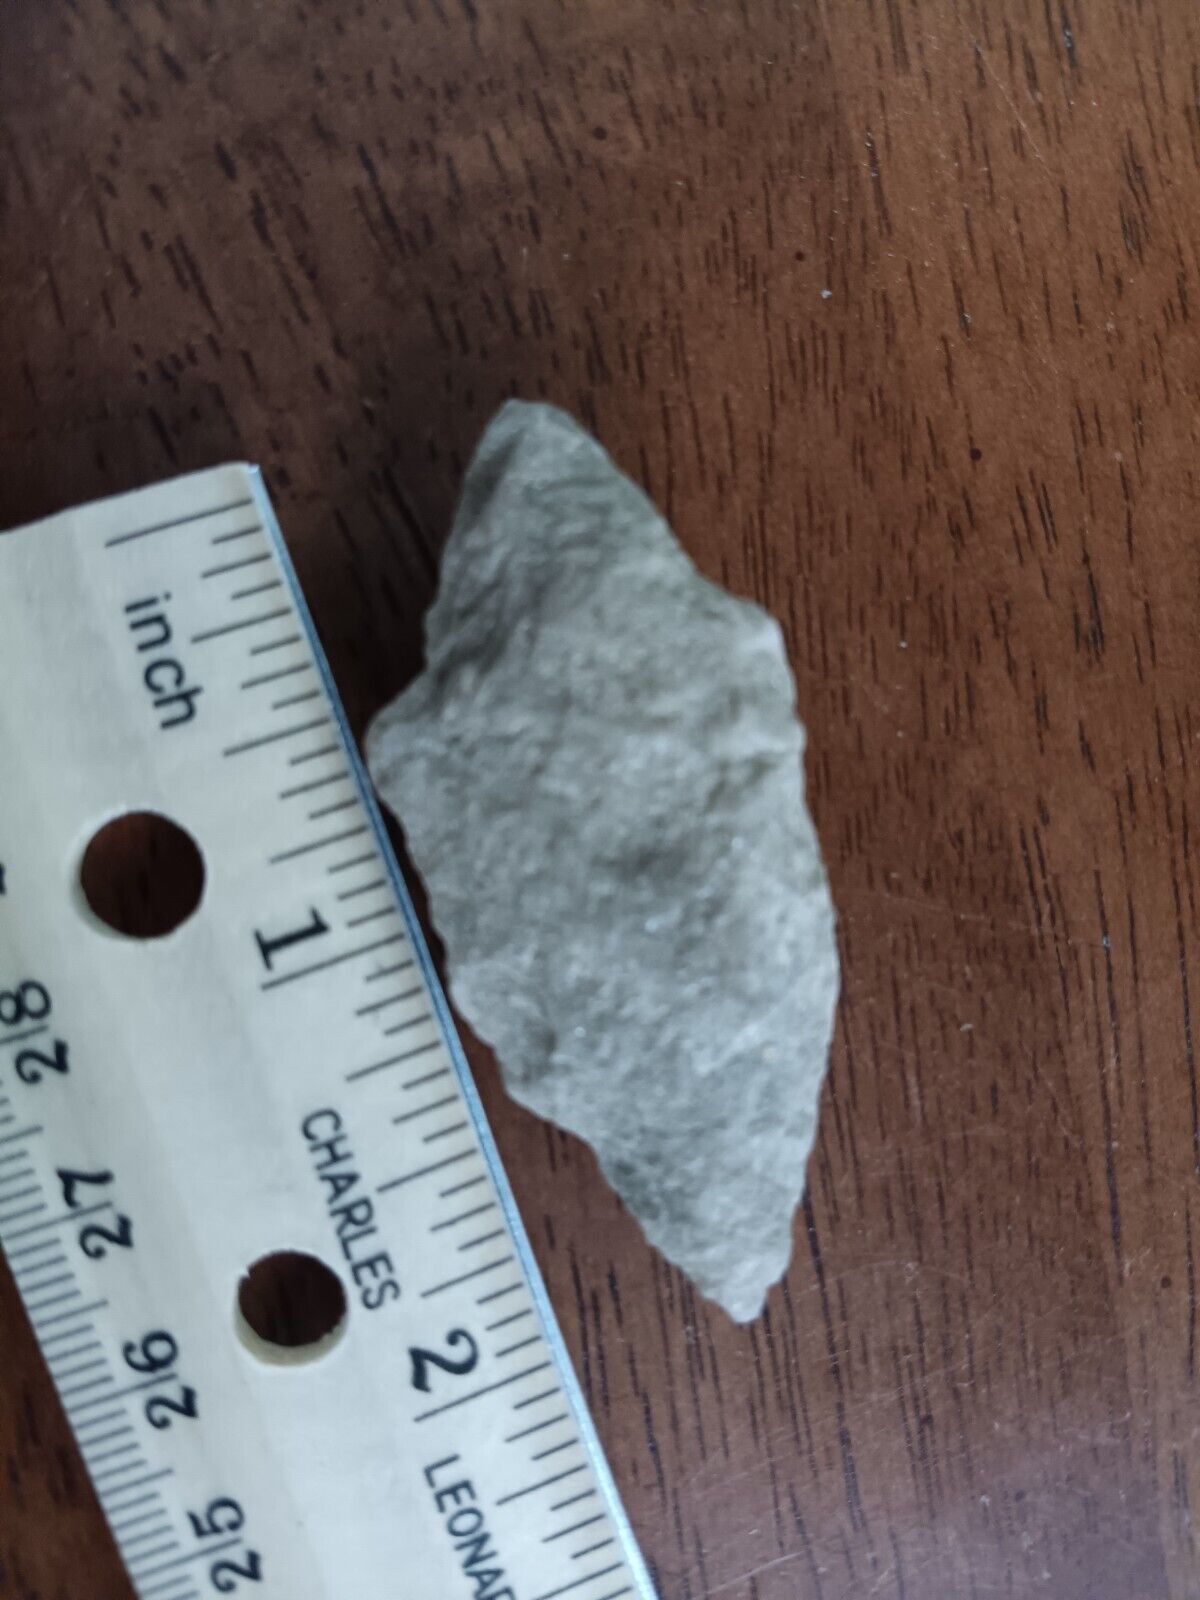 AUTHENTIC NATIVE AMERICAN INDIAN ARTIFACT FOUND, EASTERN N.C.--- ZZZ/80